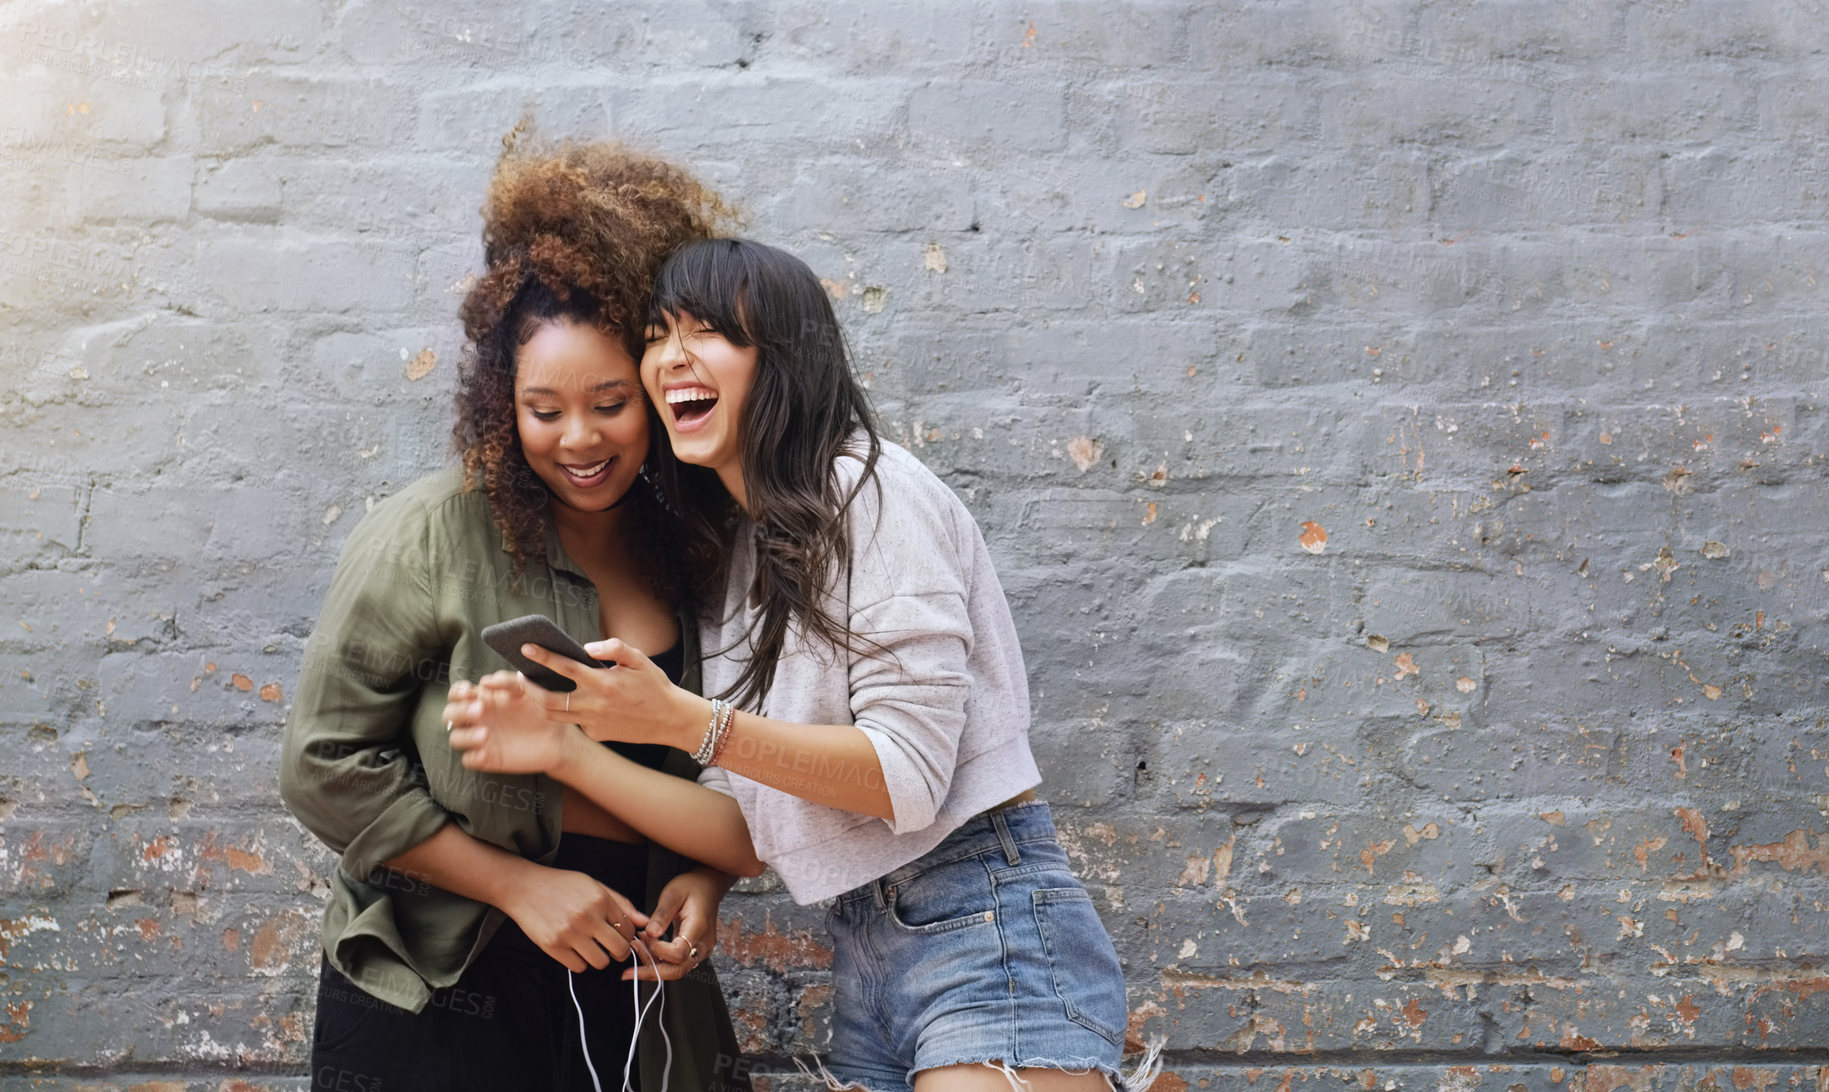 Buy stock photo Shot of two cheerful young women using a cellphone together while posing outdoors against a grey brick wall